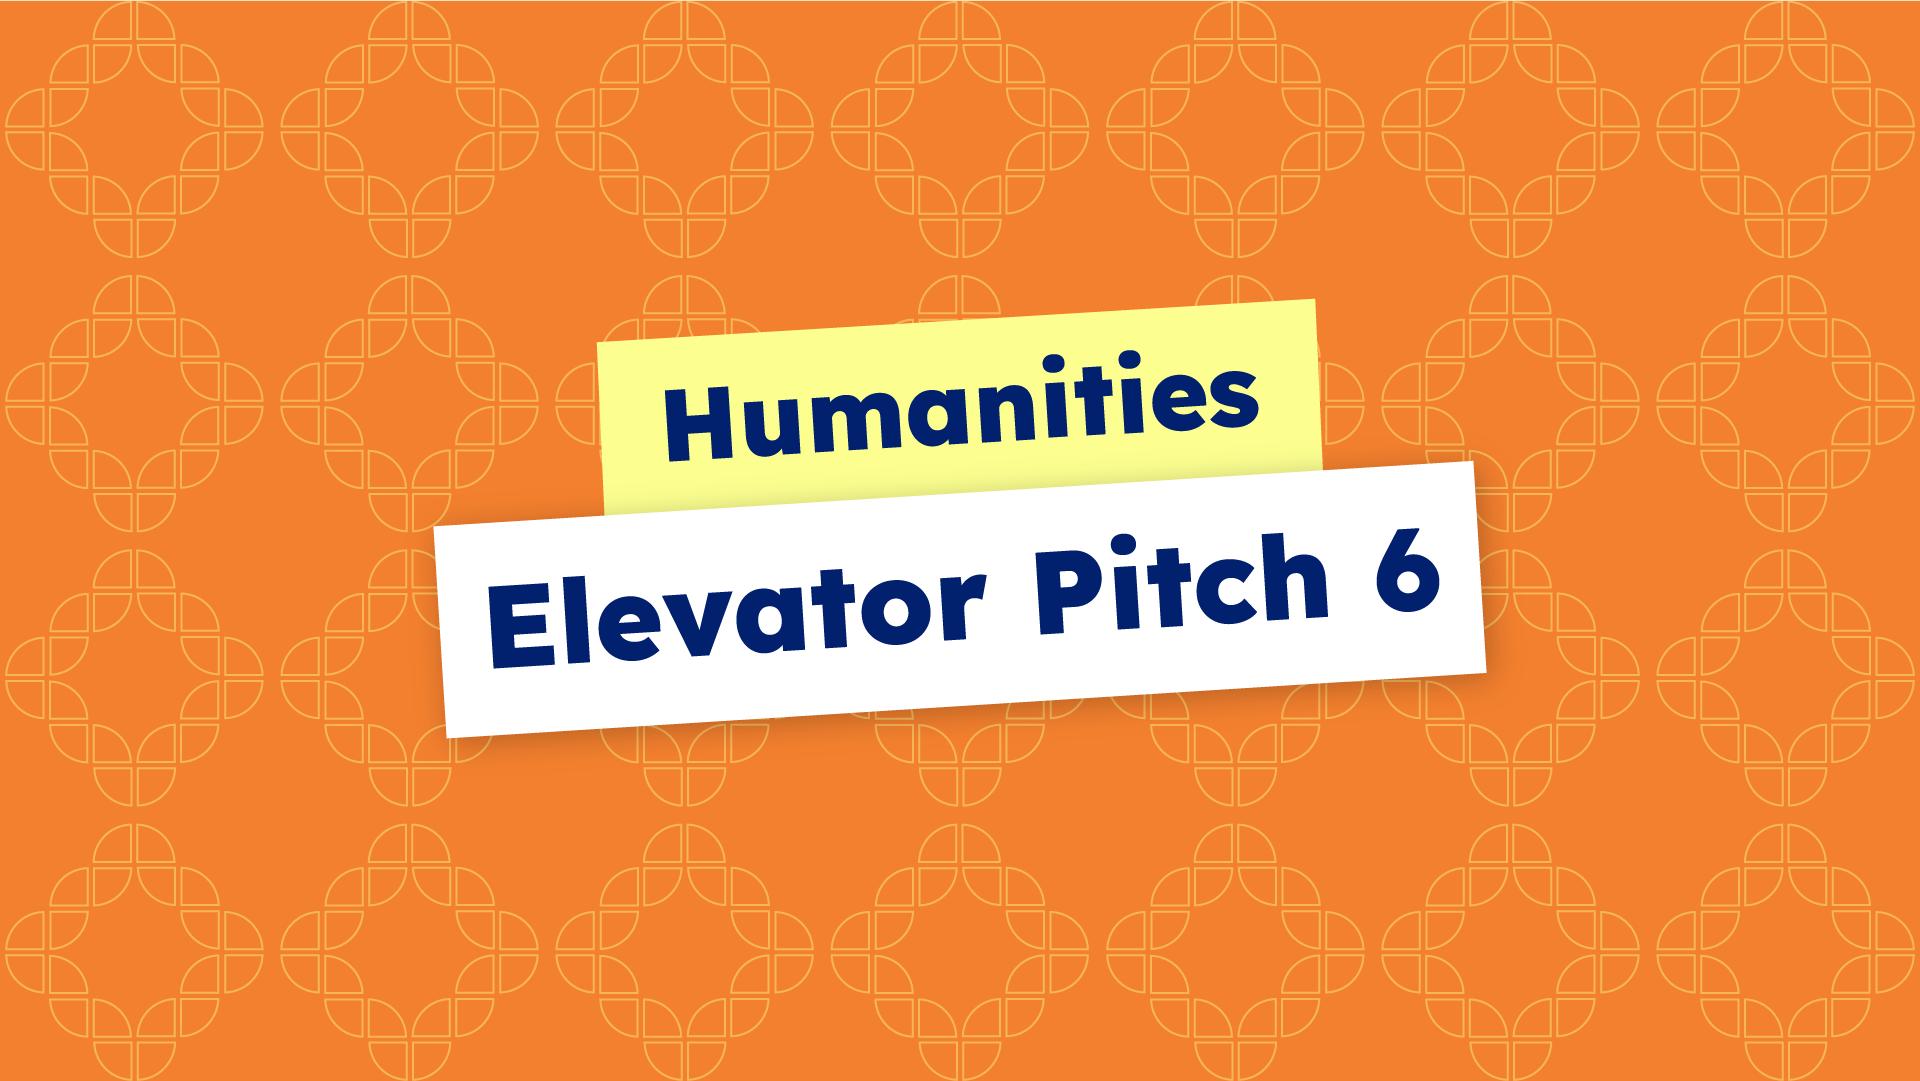 Humanities Elevator Pitch 6